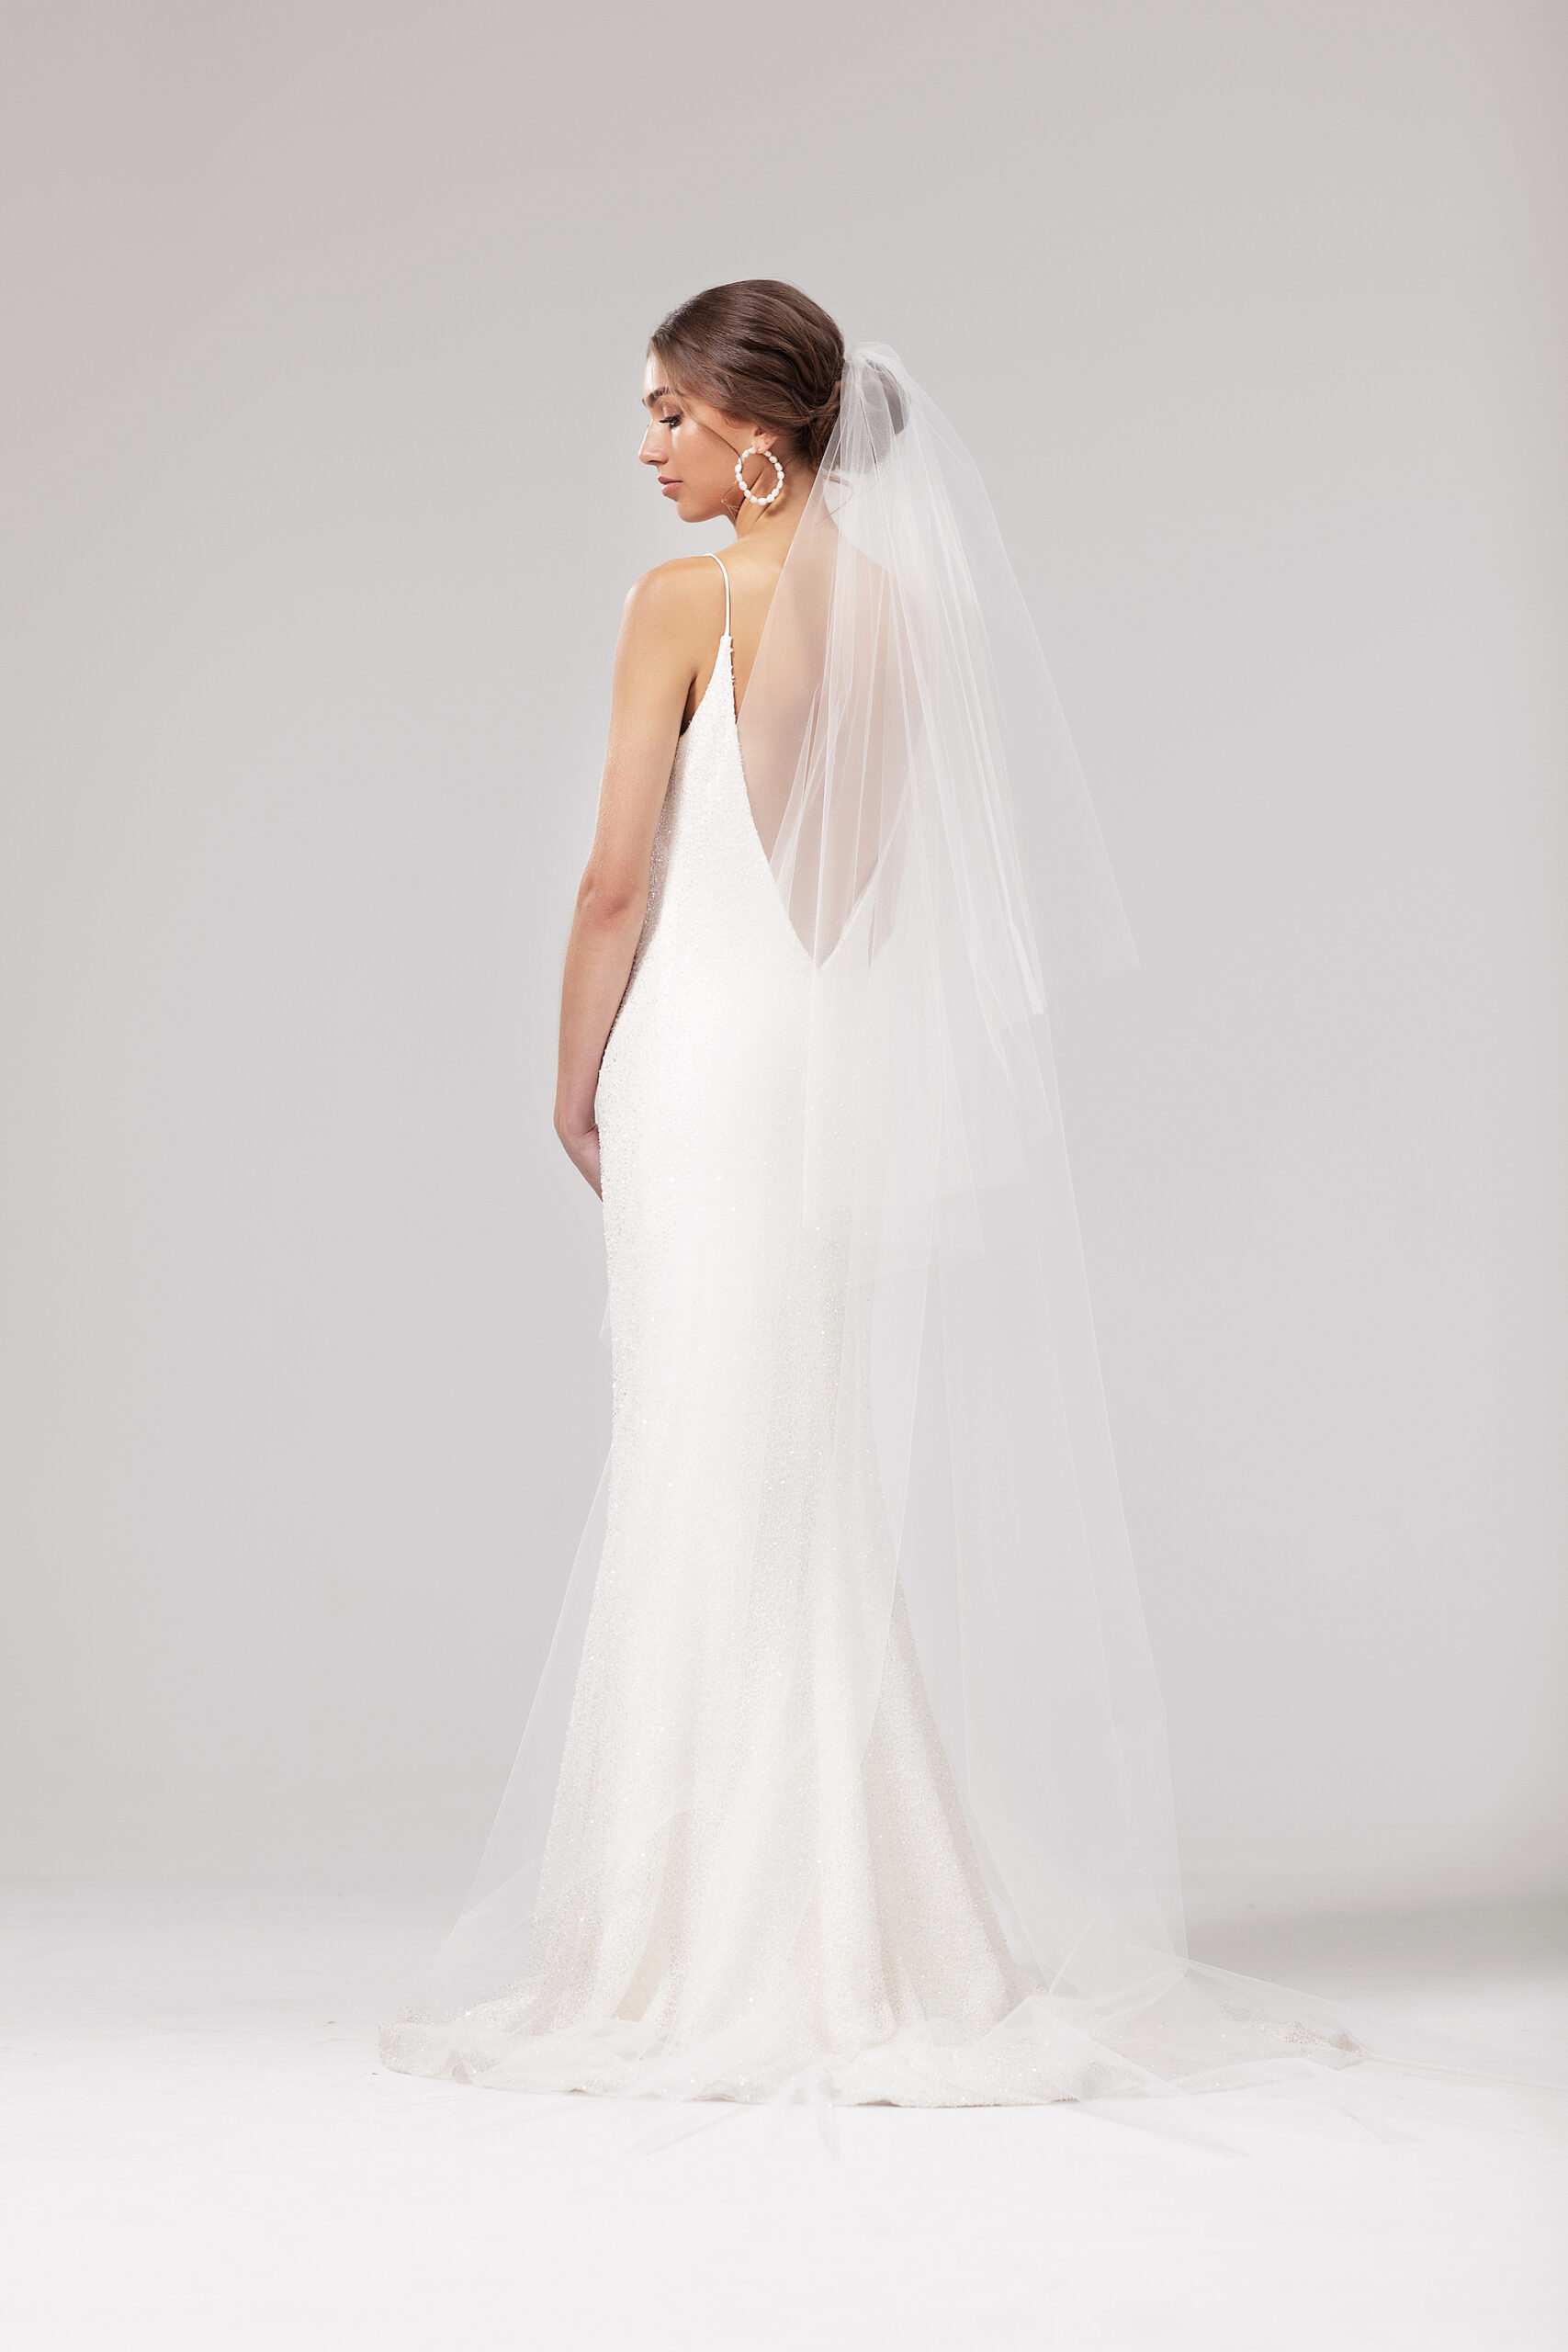 Back/side view of model wearing the Joy veil with both tiers sitting at the back. Joy is a two-tier 2.5m blusher style veil with a raw edge.